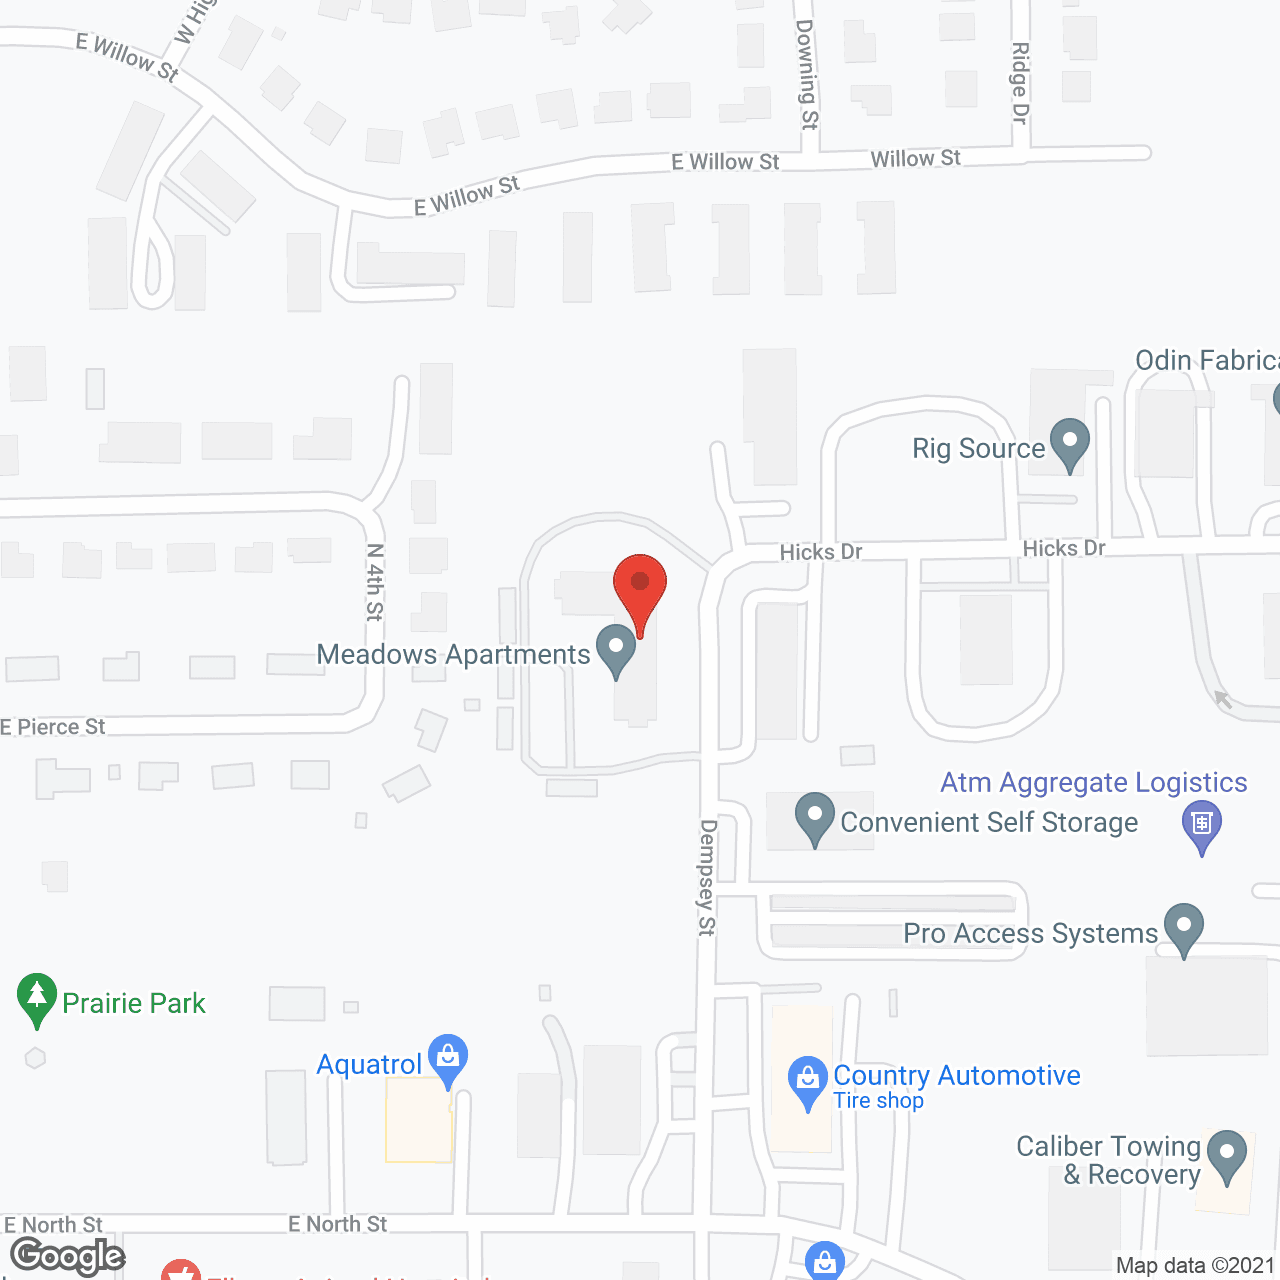 The Meadows Apartments in google map